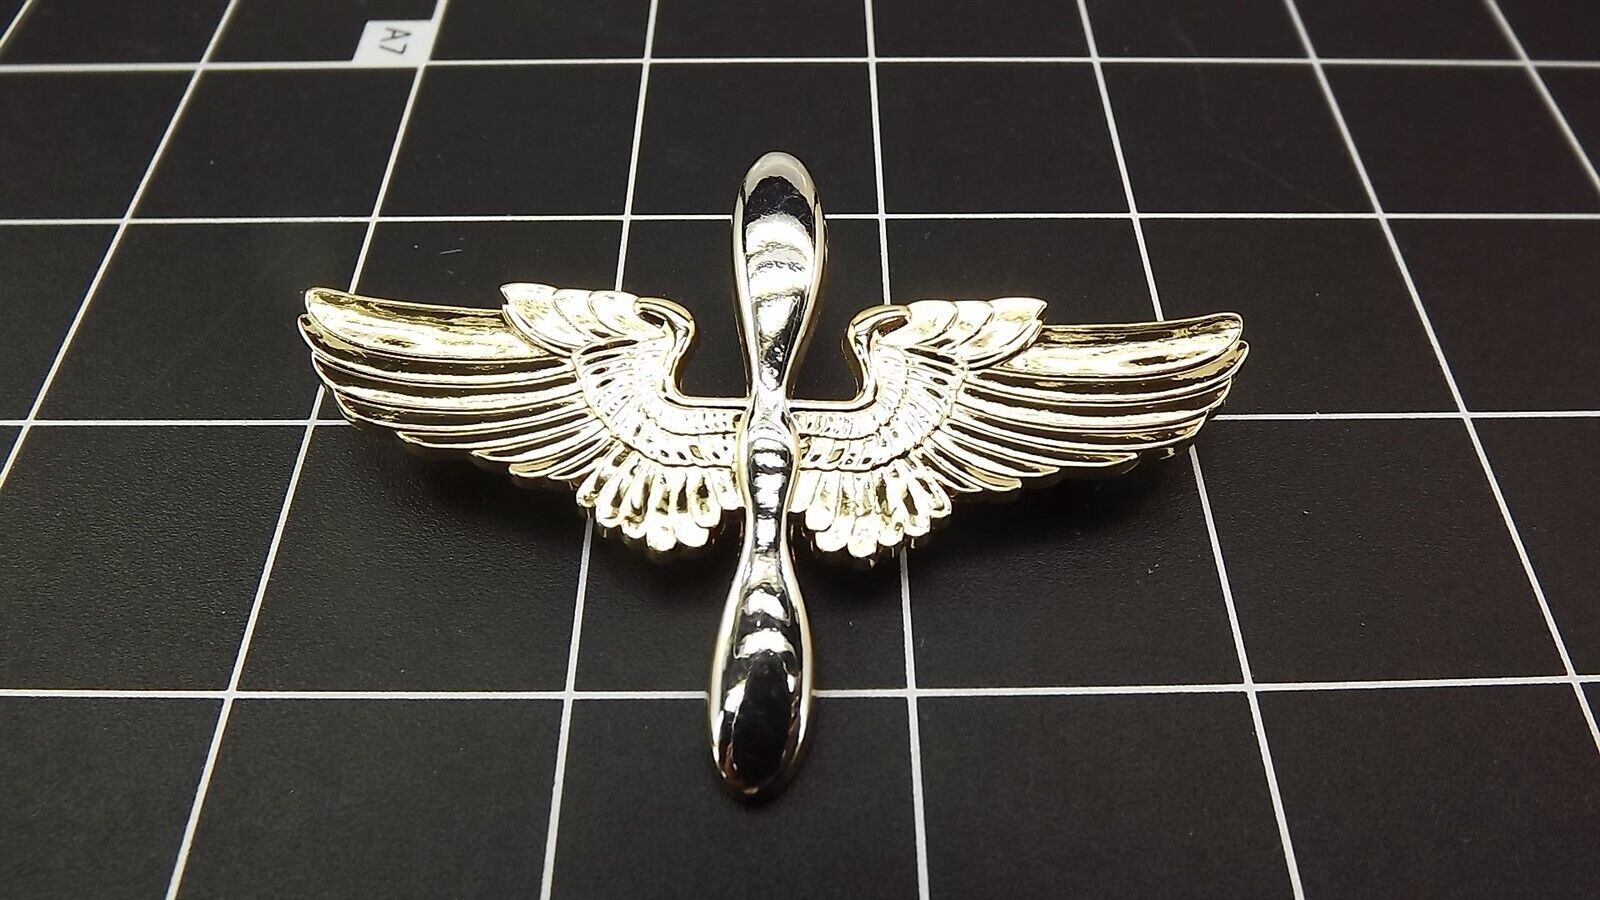 BRAND NEW Two Tone Lapel Pin U.S. ARMY Aviator Early Pilot Wing 3 1/8